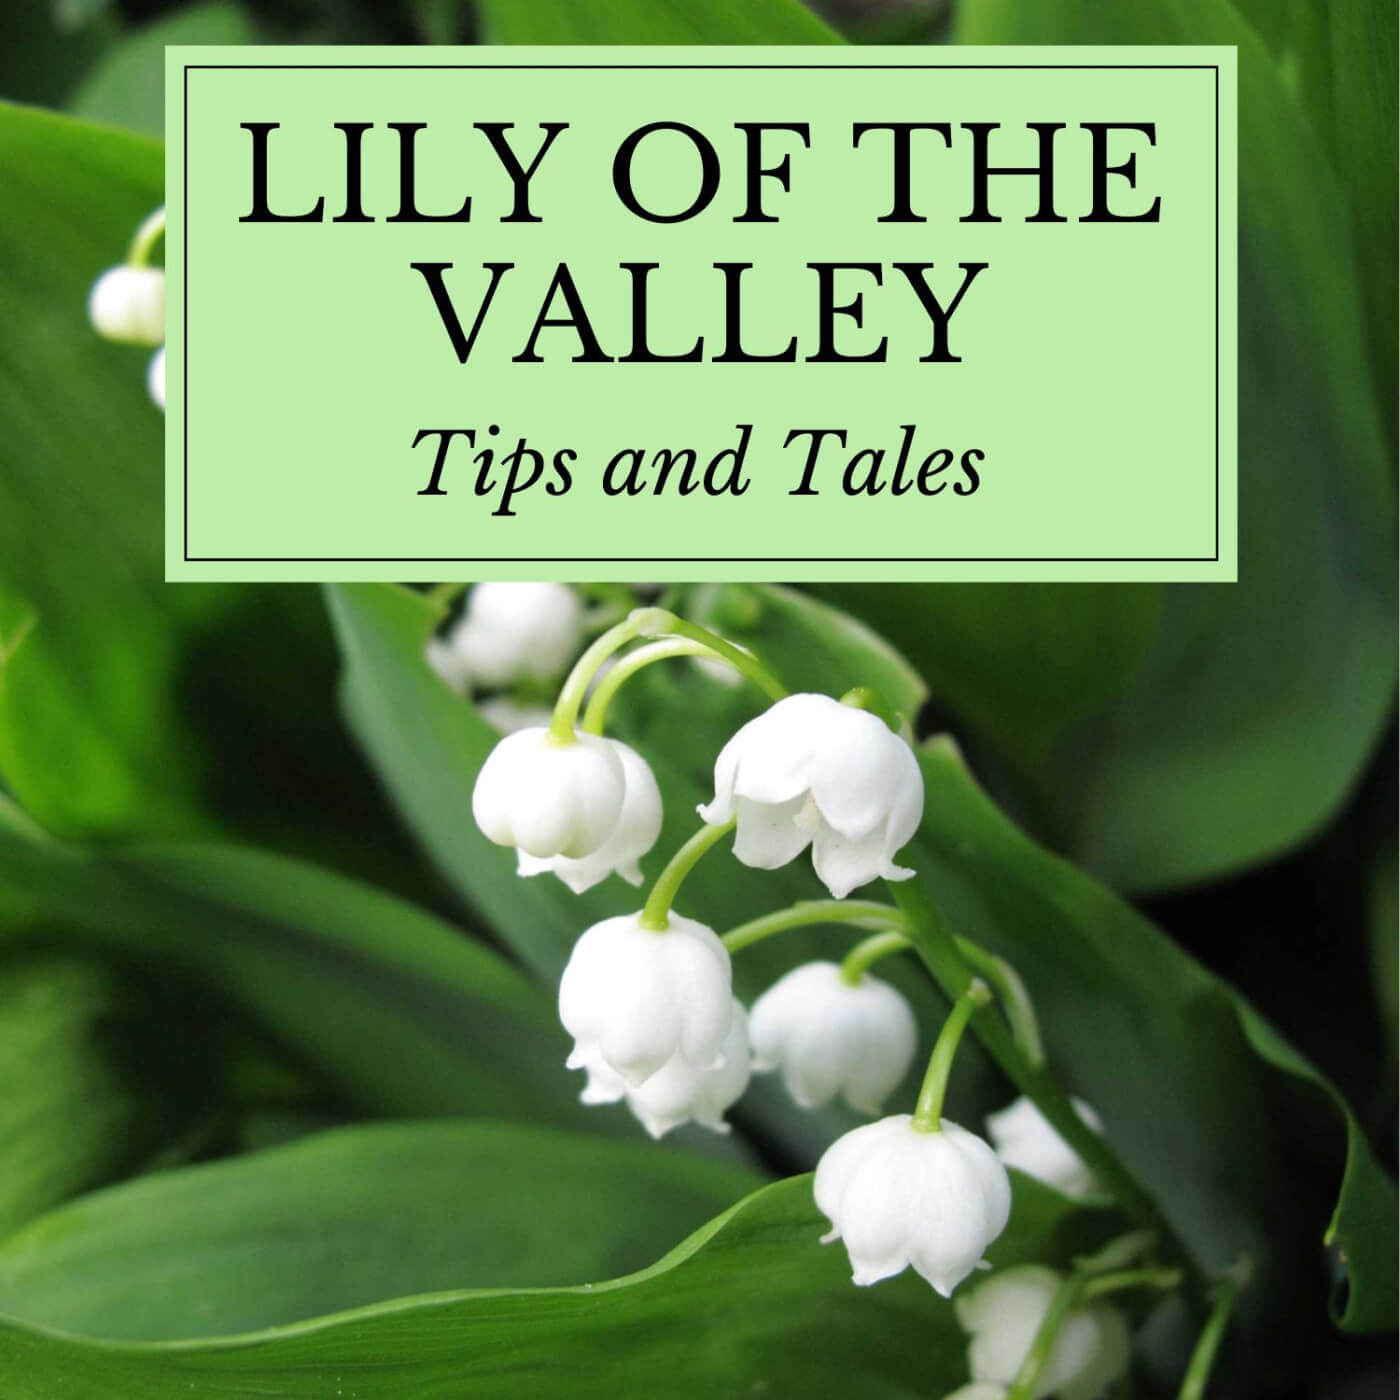 https://dropinblog.net/34250657/files/featured/Lily_of_the_Valley_openera.jpg